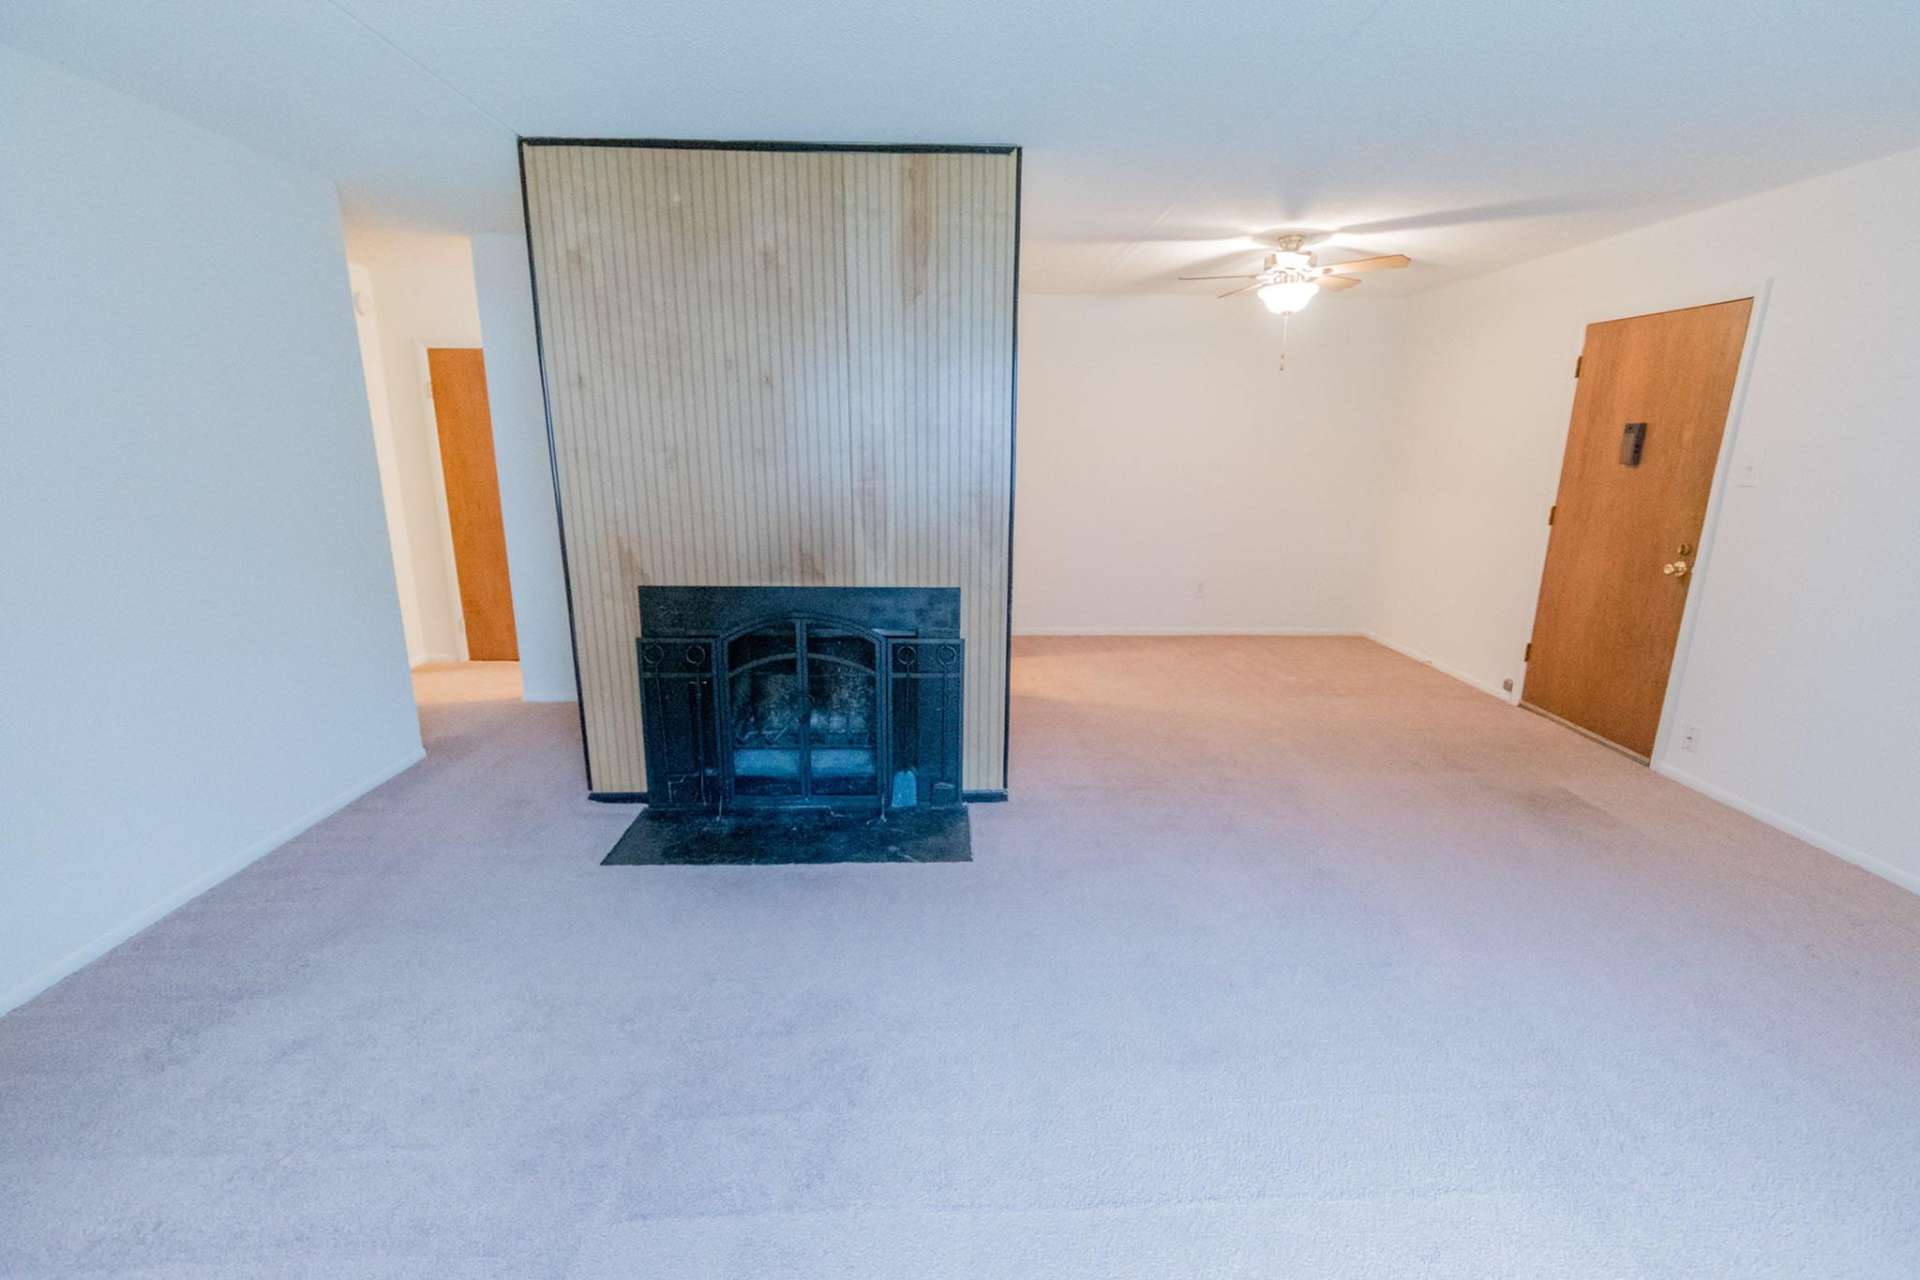 Carpeted living room with a fireplace and a ceiling fan in an apartment at Hollow Run.